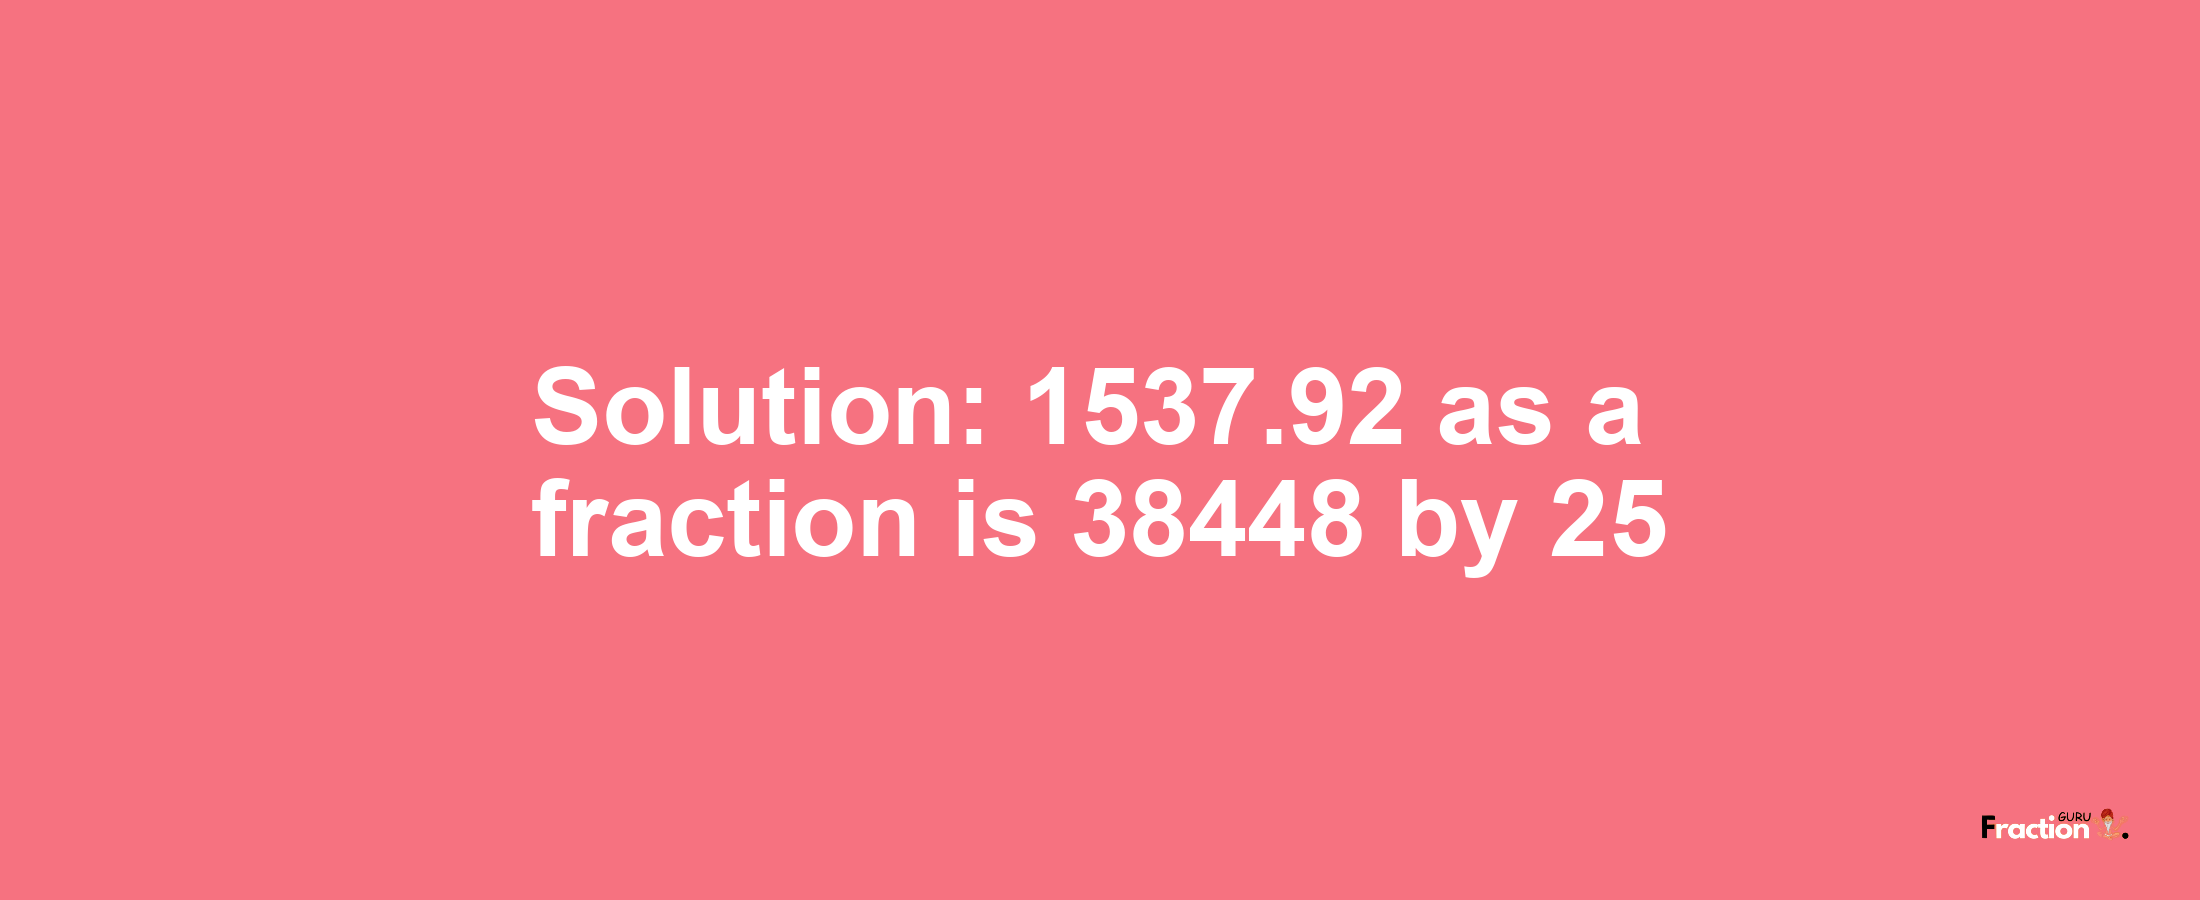 Solution:1537.92 as a fraction is 38448/25